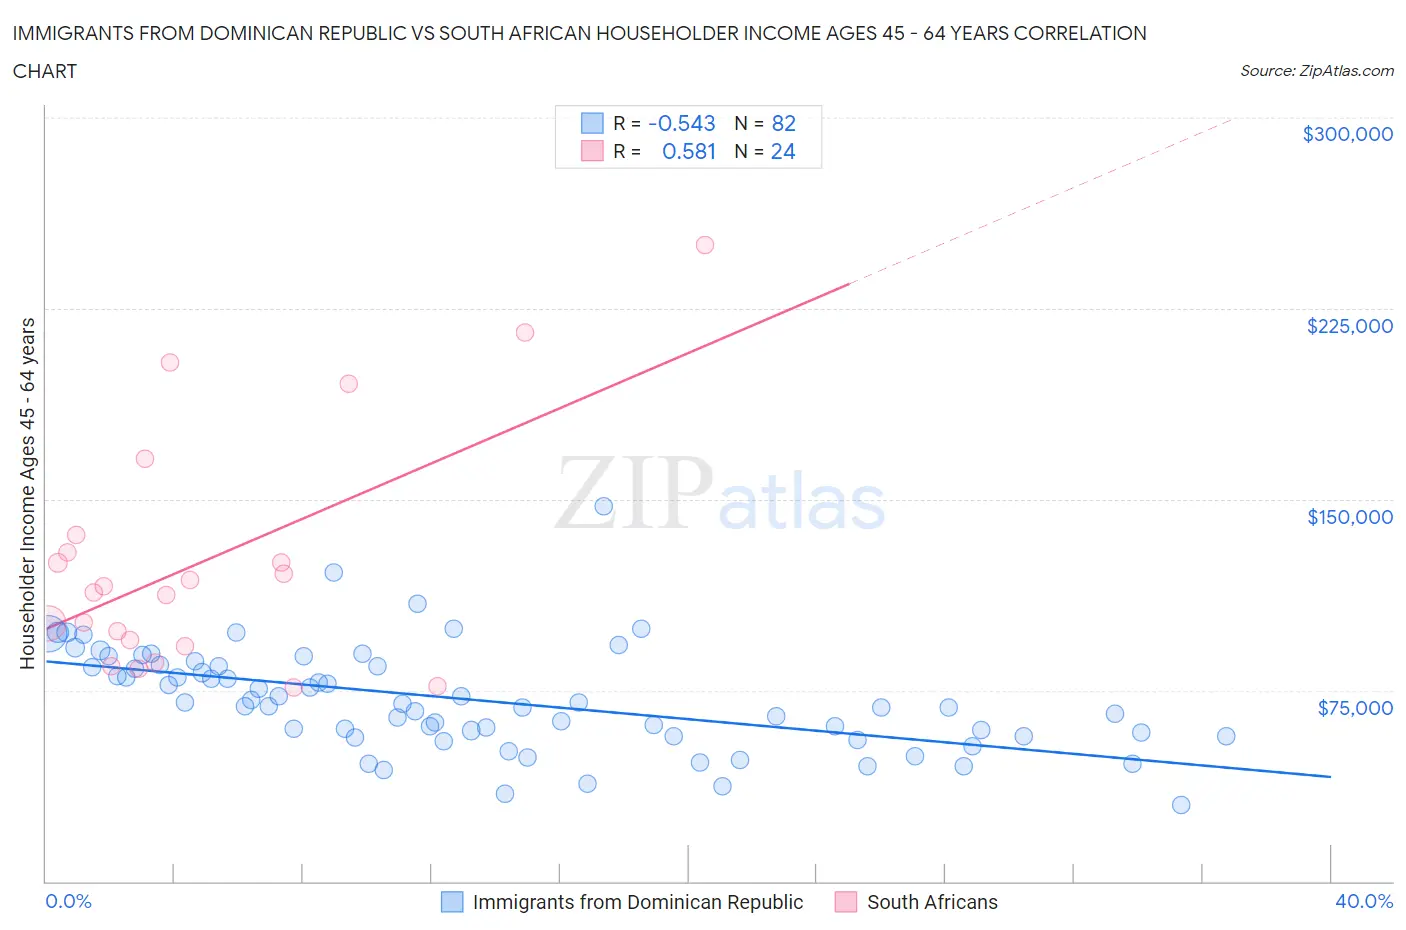 Immigrants from Dominican Republic vs South African Householder Income Ages 45 - 64 years